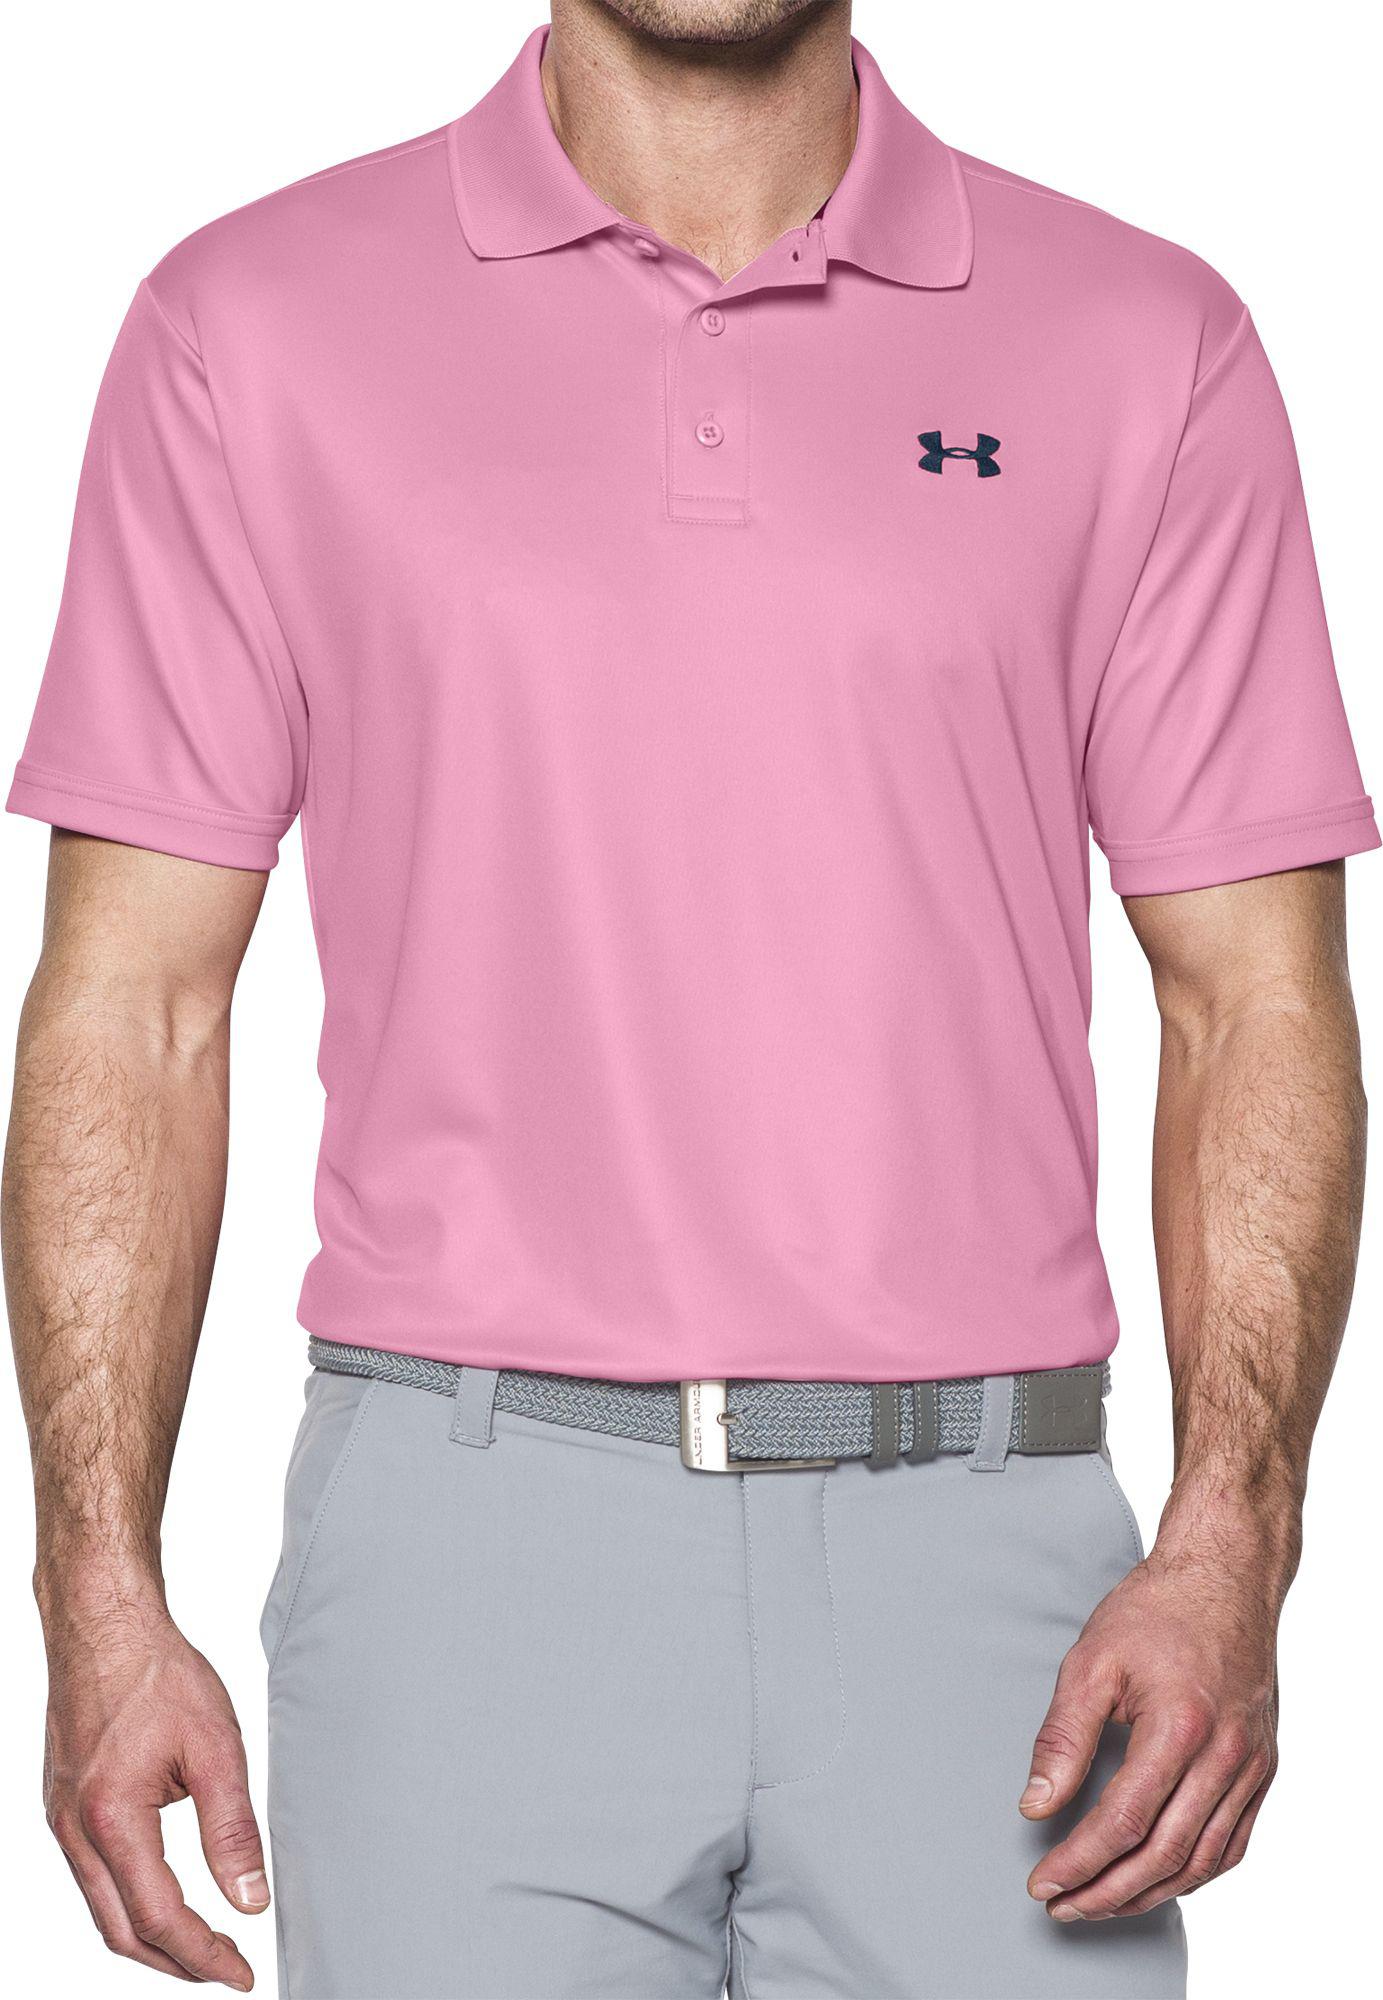 under armour big and tall golf shirts